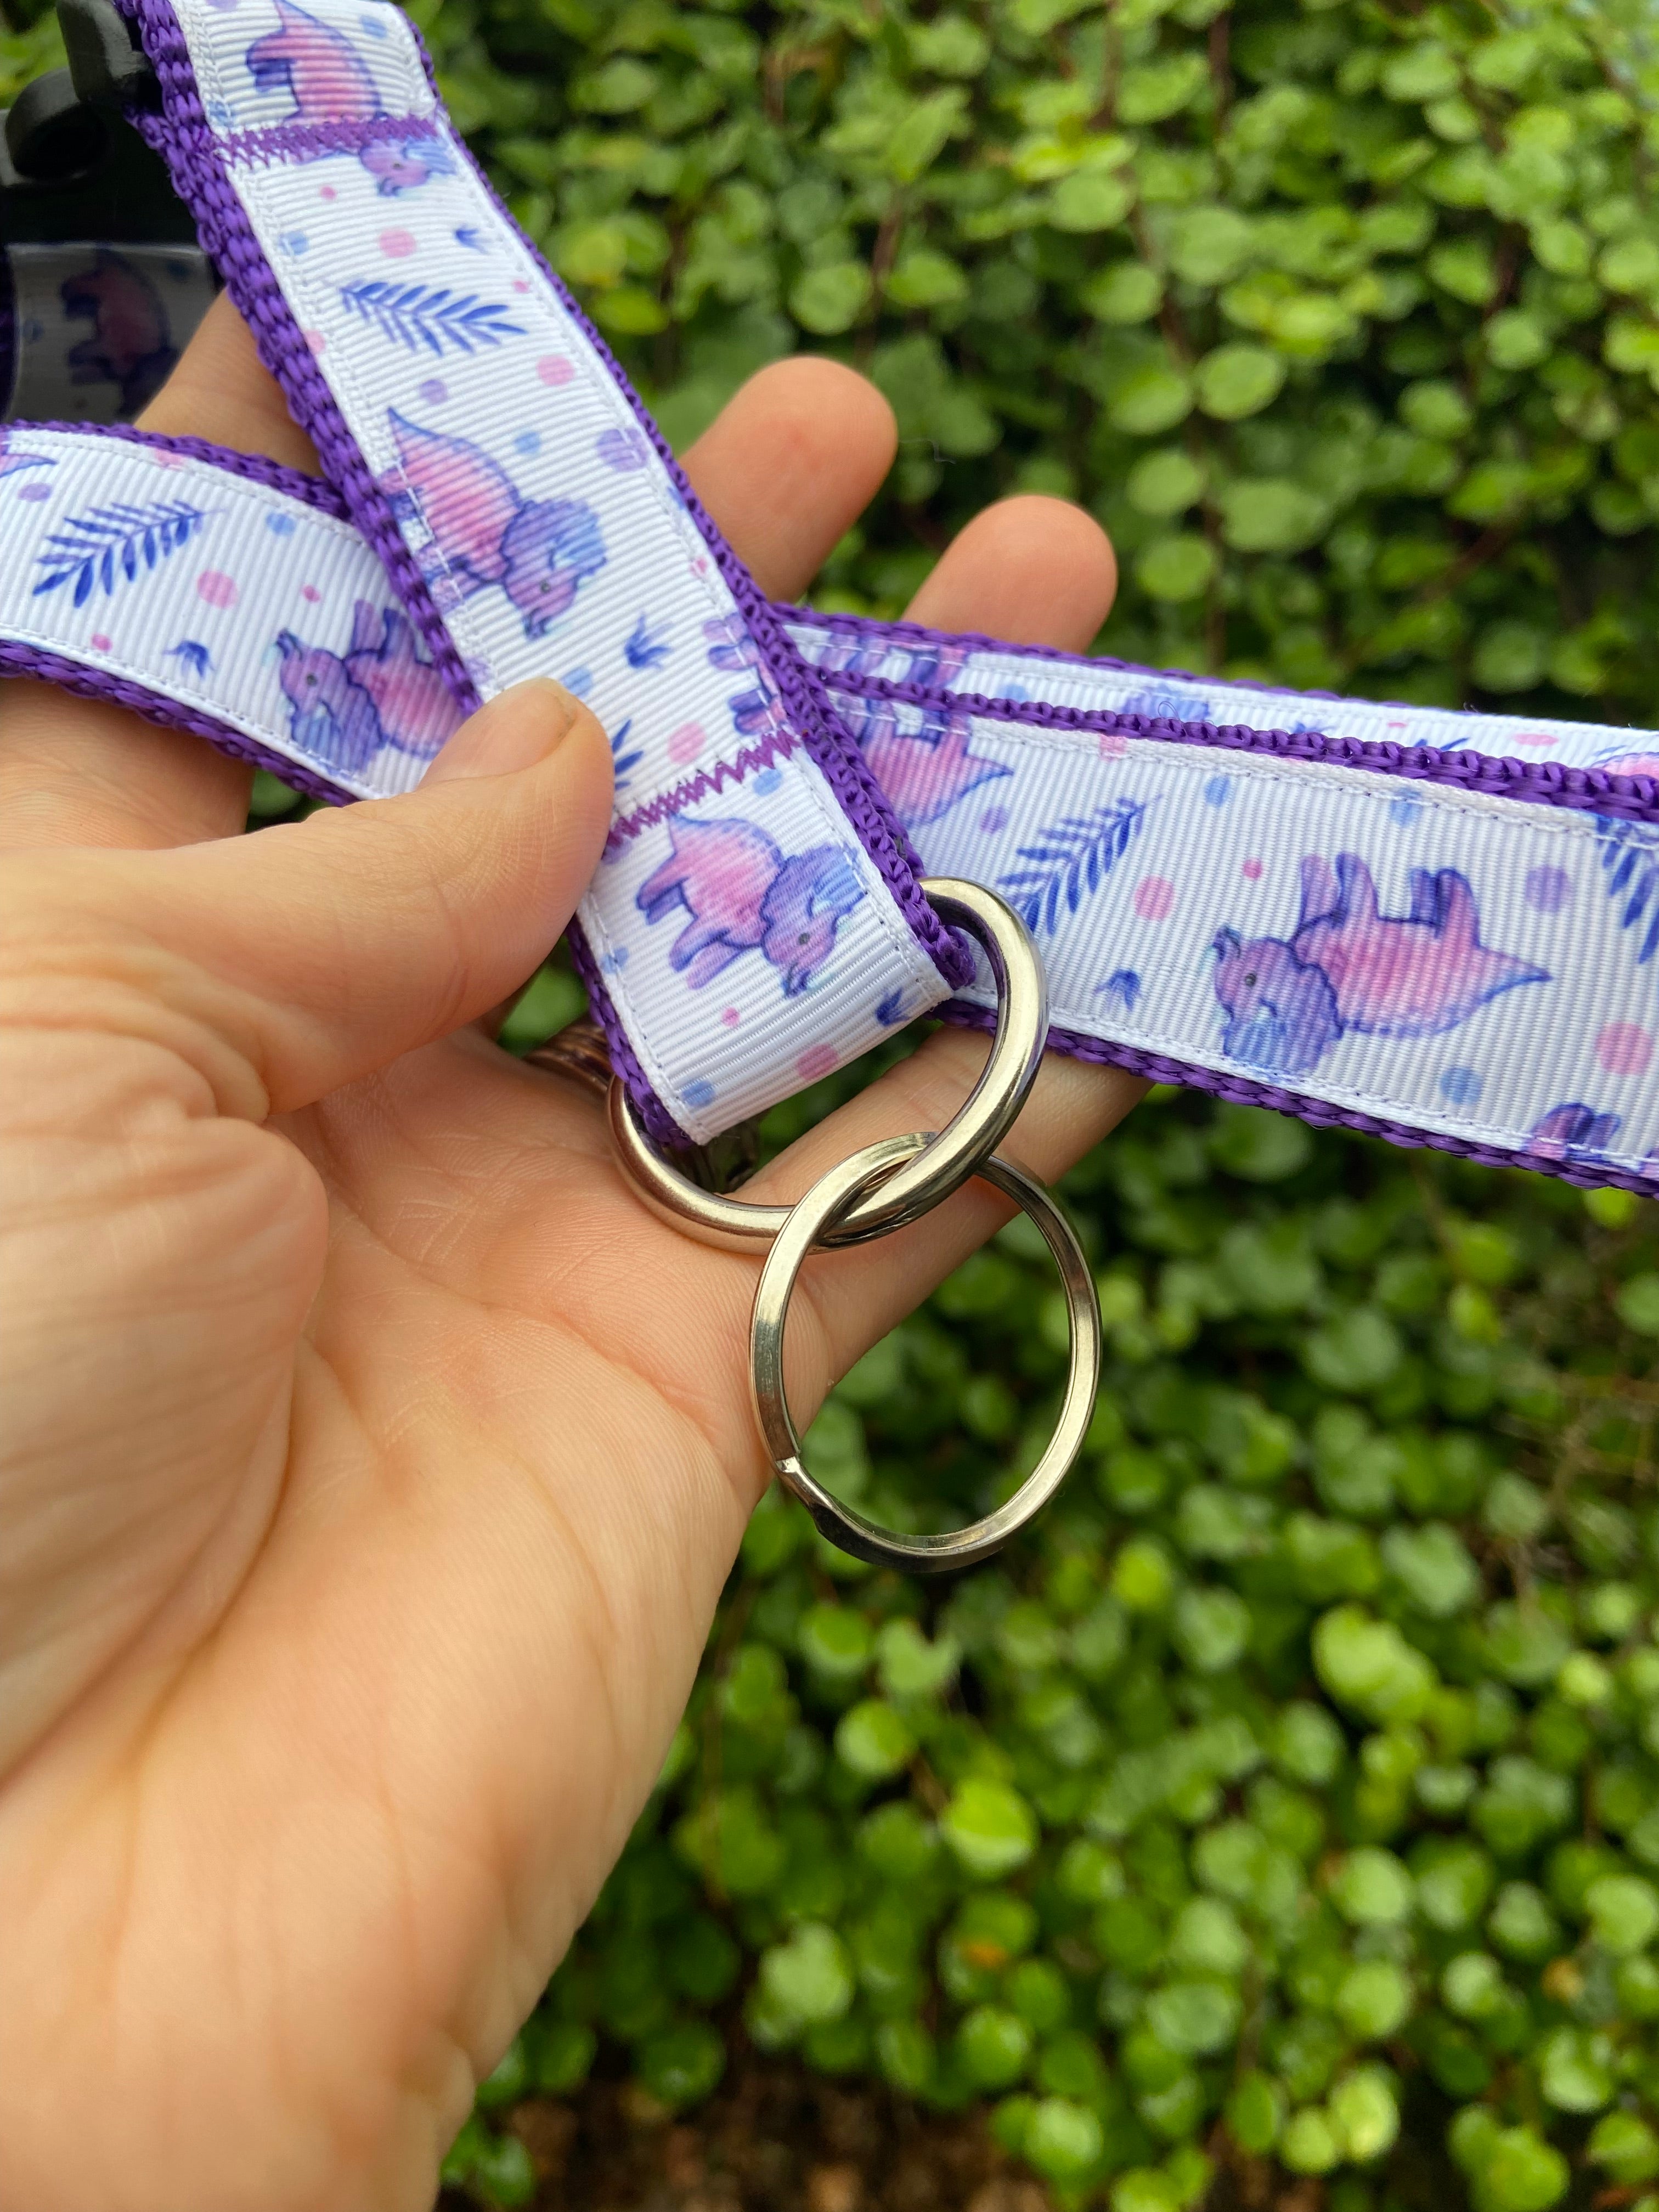 Triceratops Buckle Keychain - Dinoverse exclusive made by Albino Bee Studio!